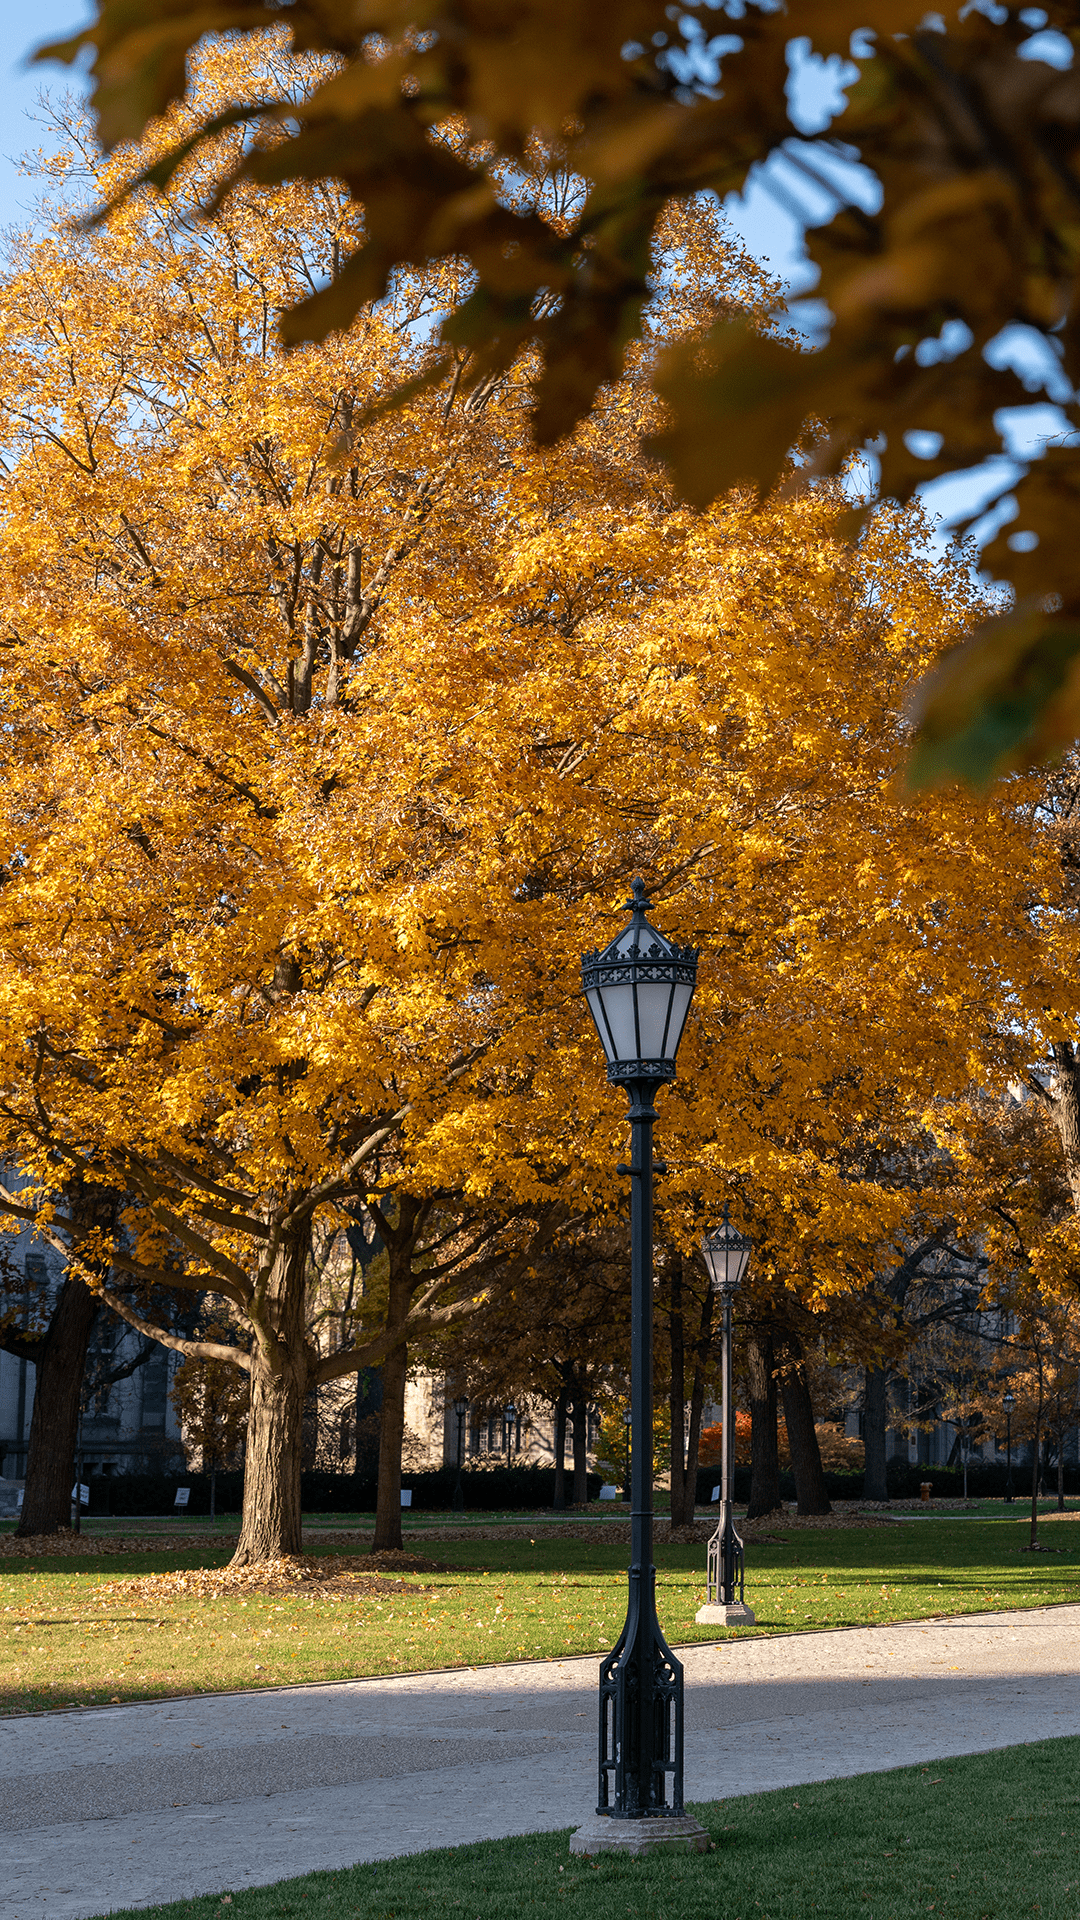 Lamp post on the main quad with golden orange trees in the background